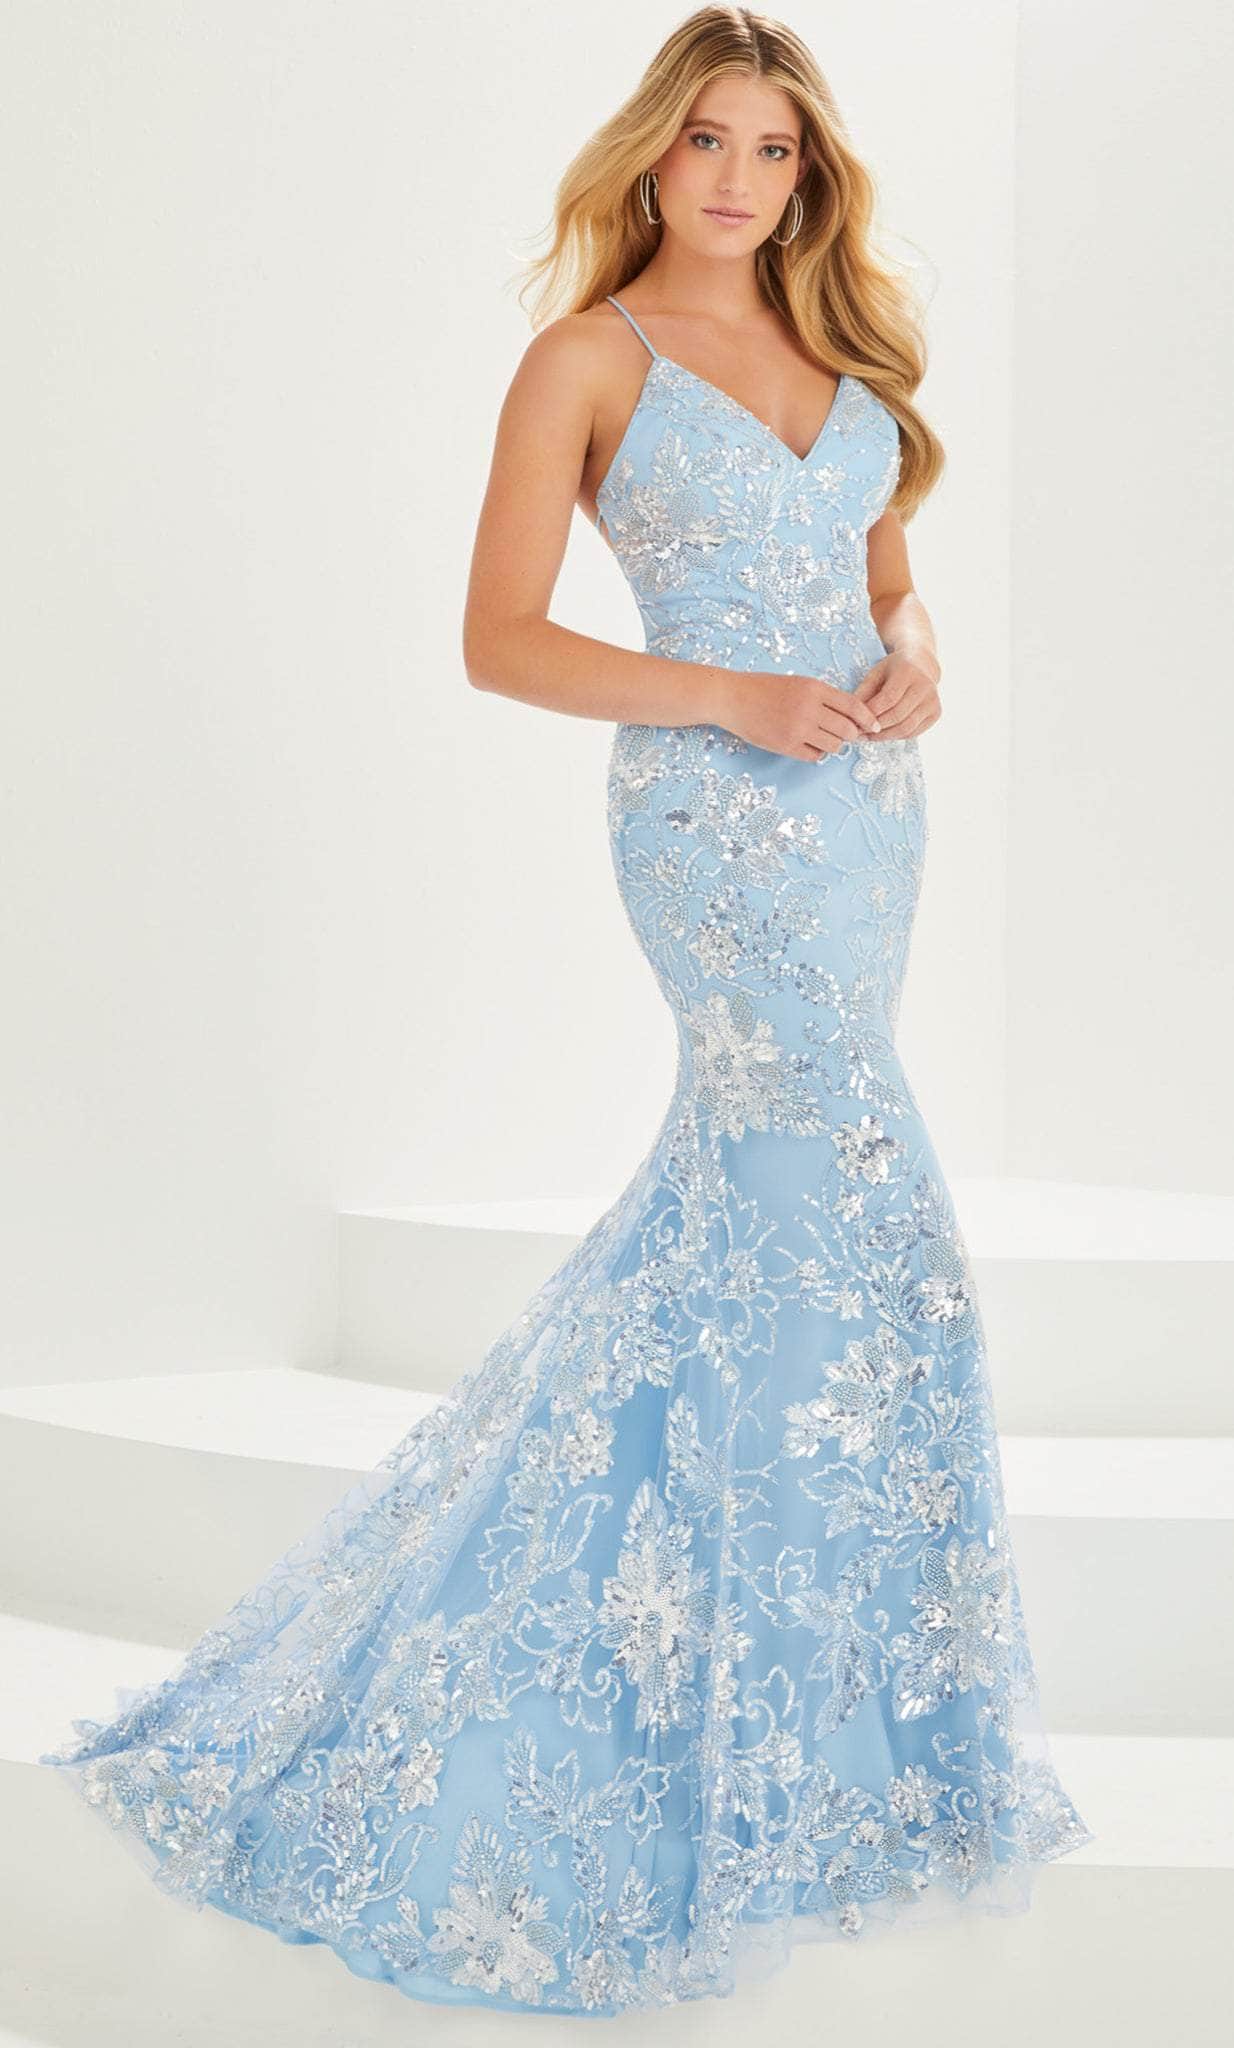 Tiffany Designs by Christina Wu 16026 - Sequined Lace Prom Gown
